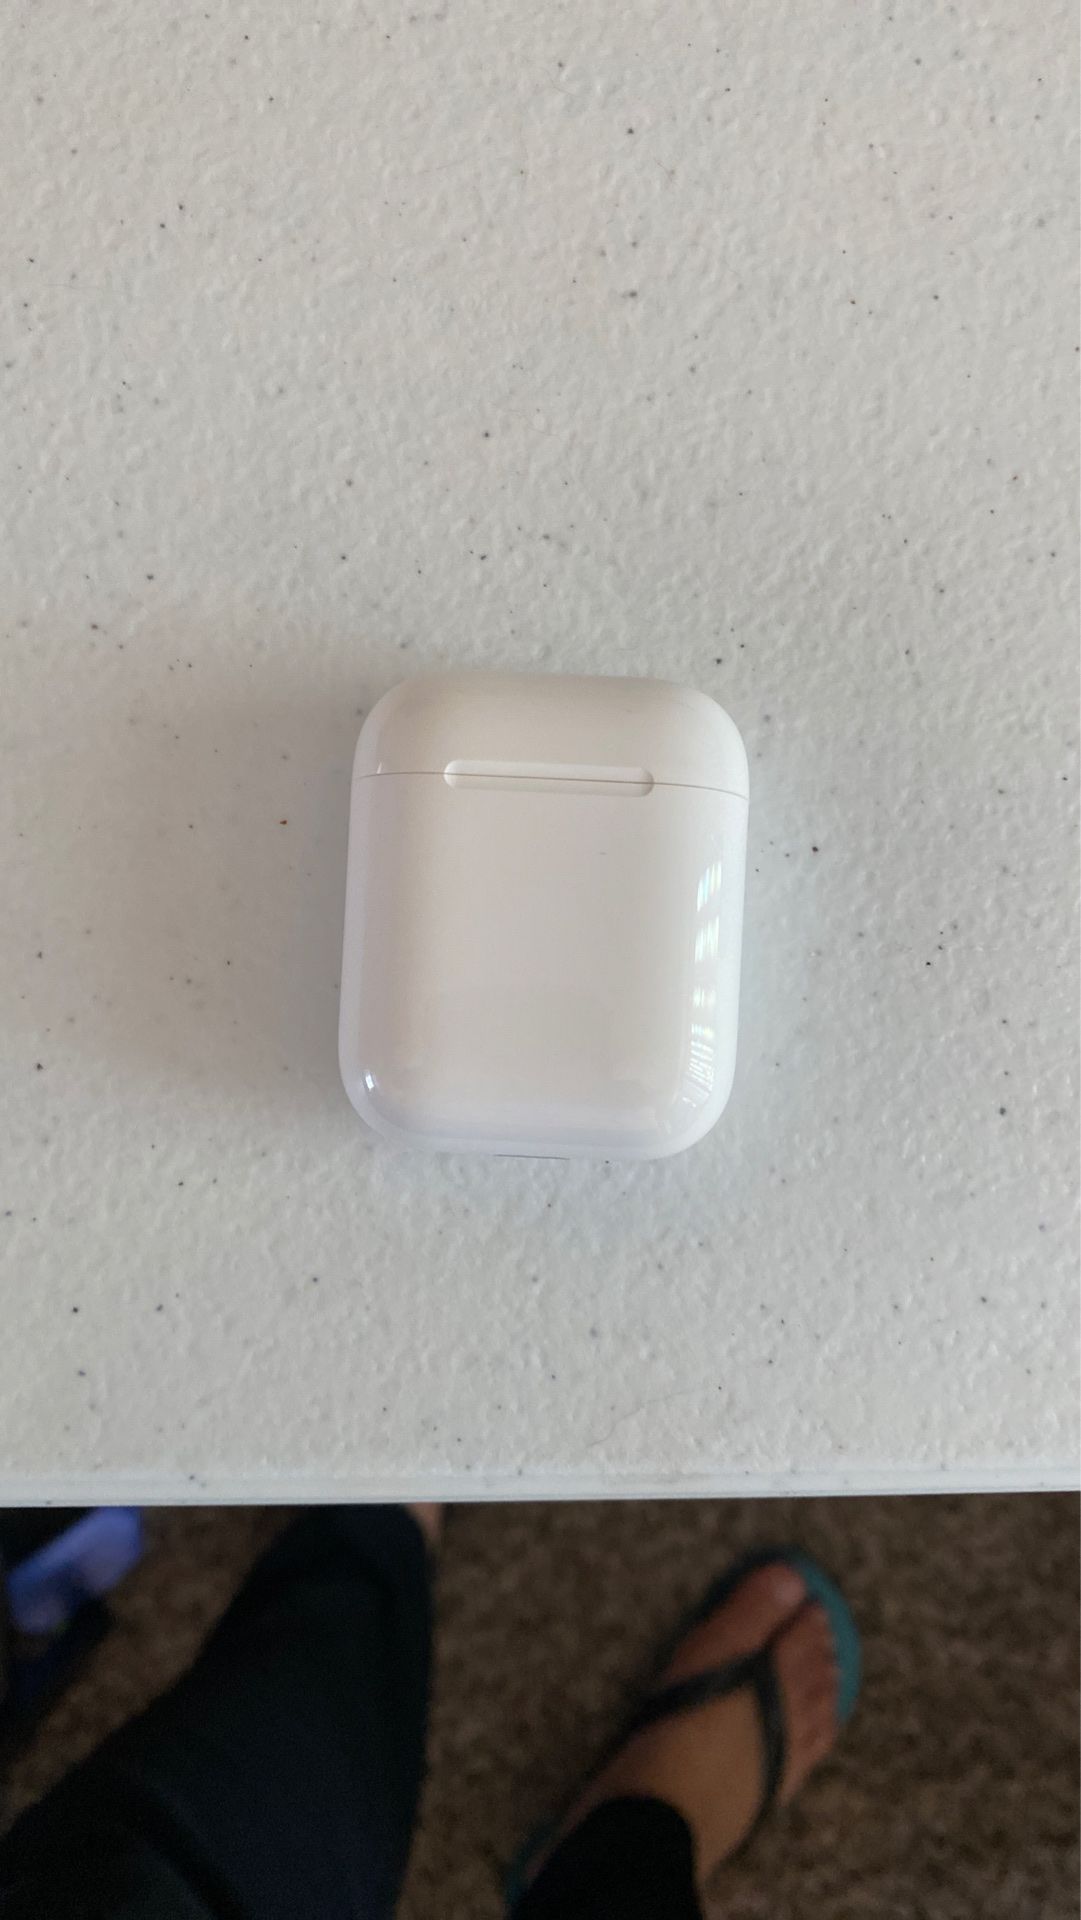 AirPods for 140